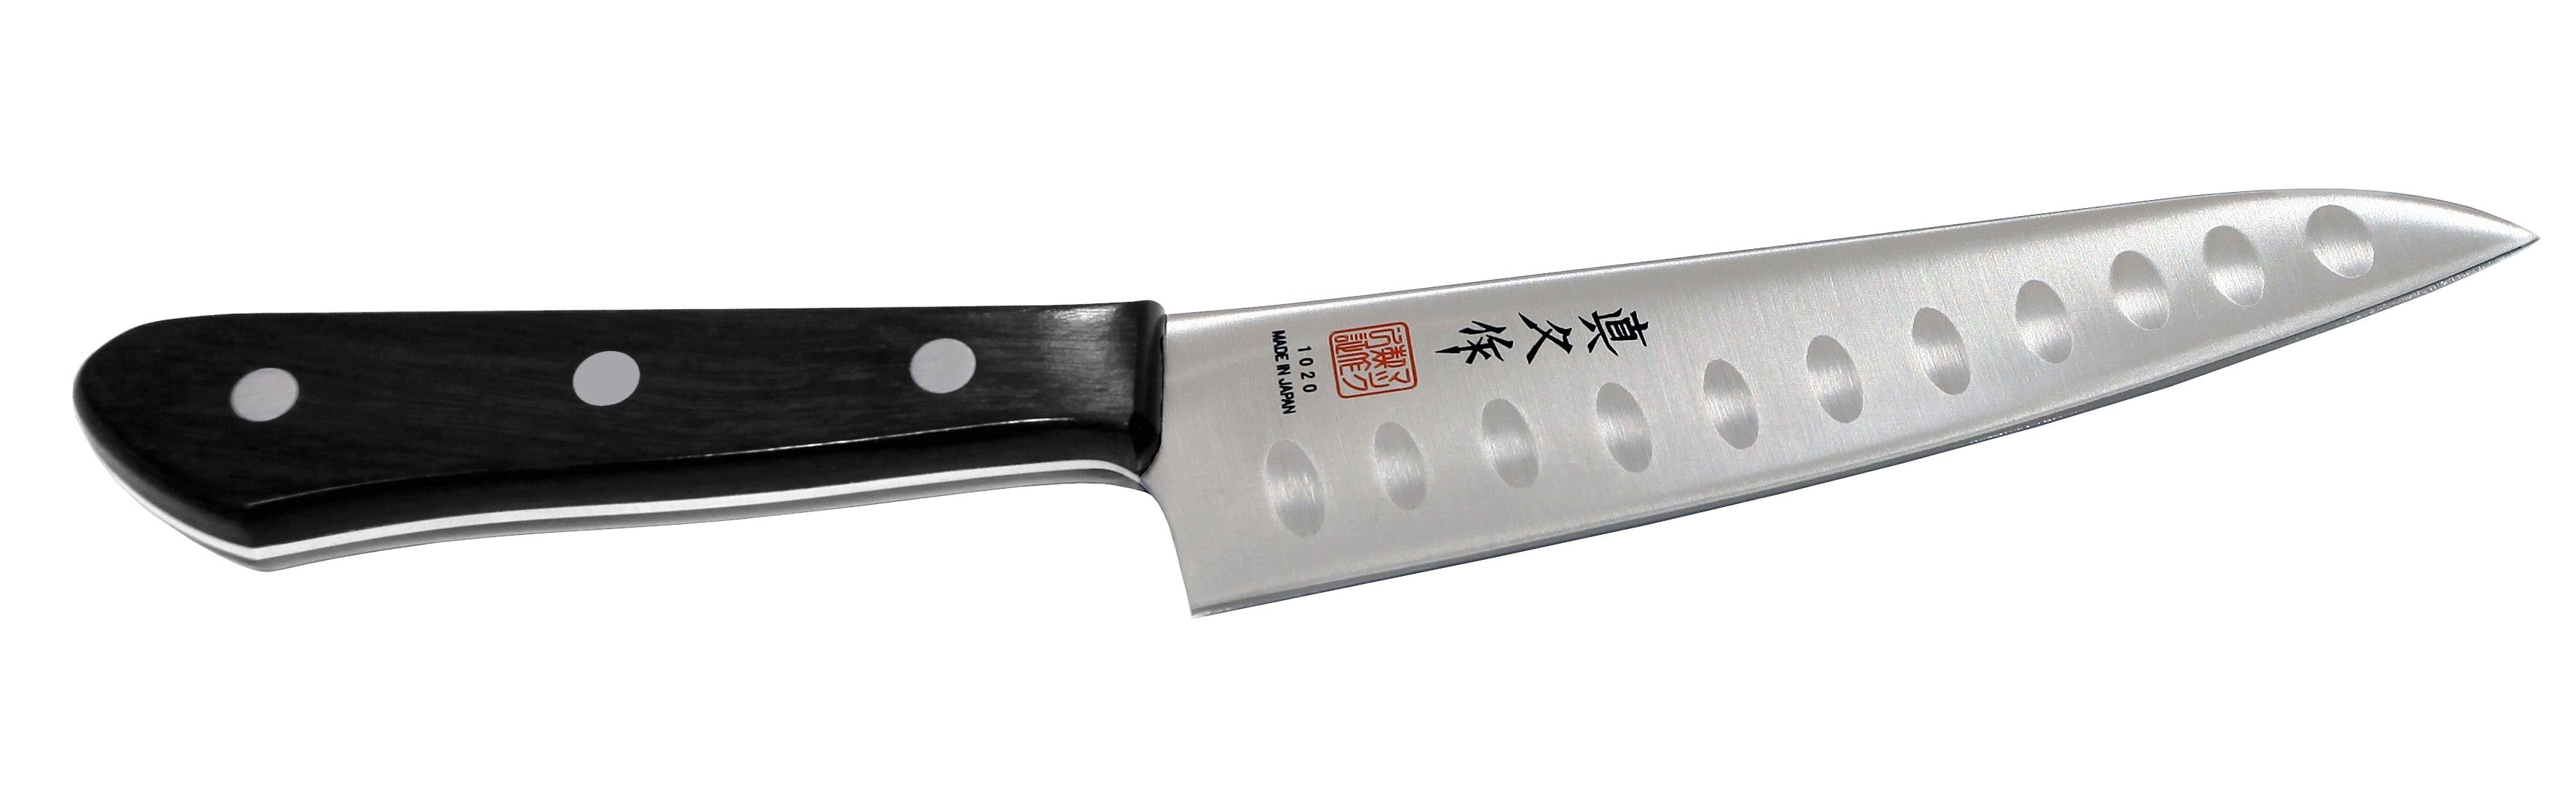 Mac Chef's Series 5" Dimpled Utility Knife